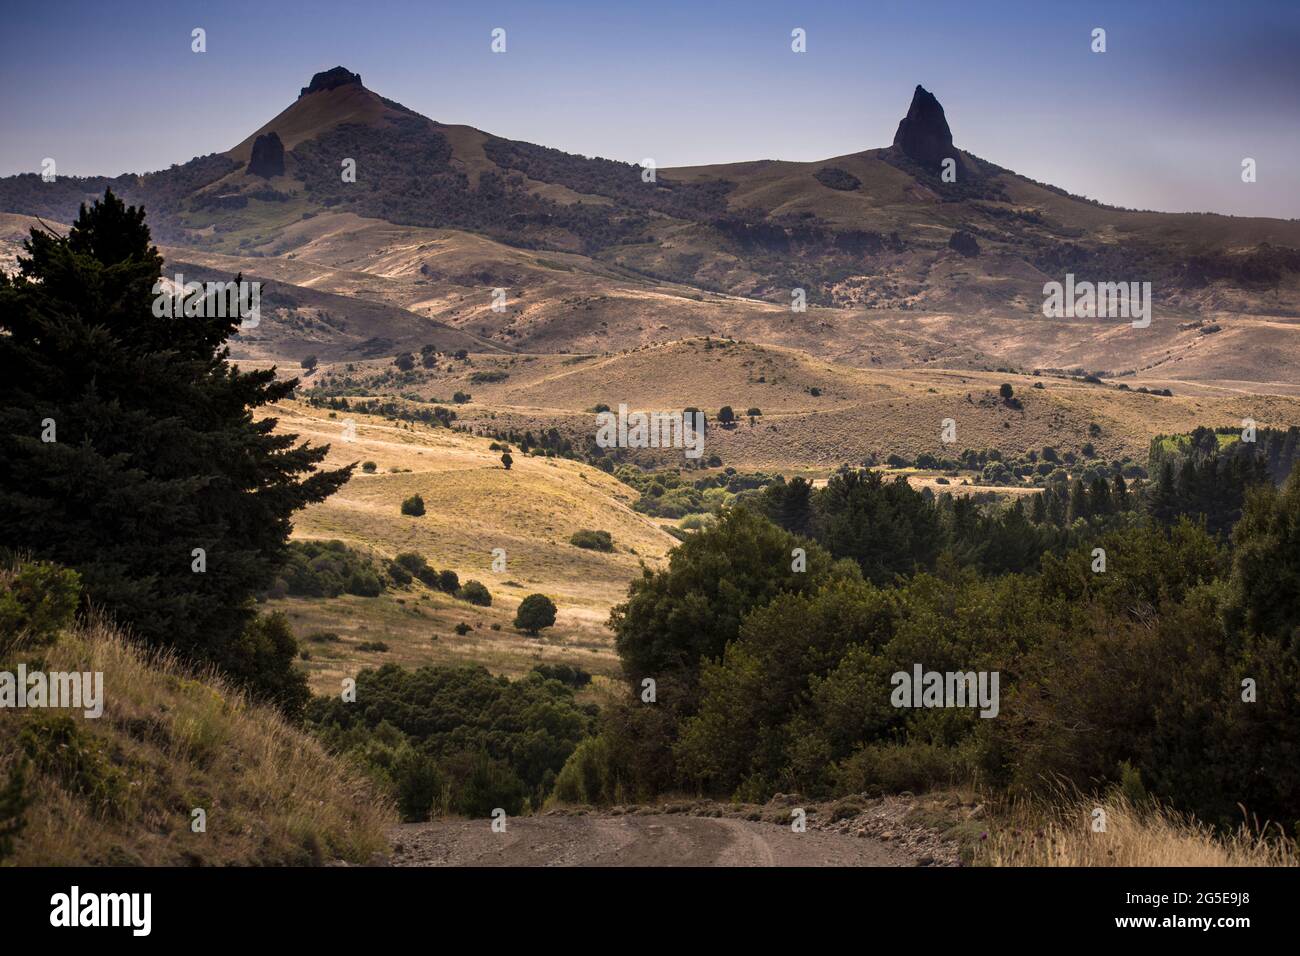 Mountain tops with interesting shapes in open field near Junin de los Andes, a little town in Neuquén Province, Argentina. Stock Photo